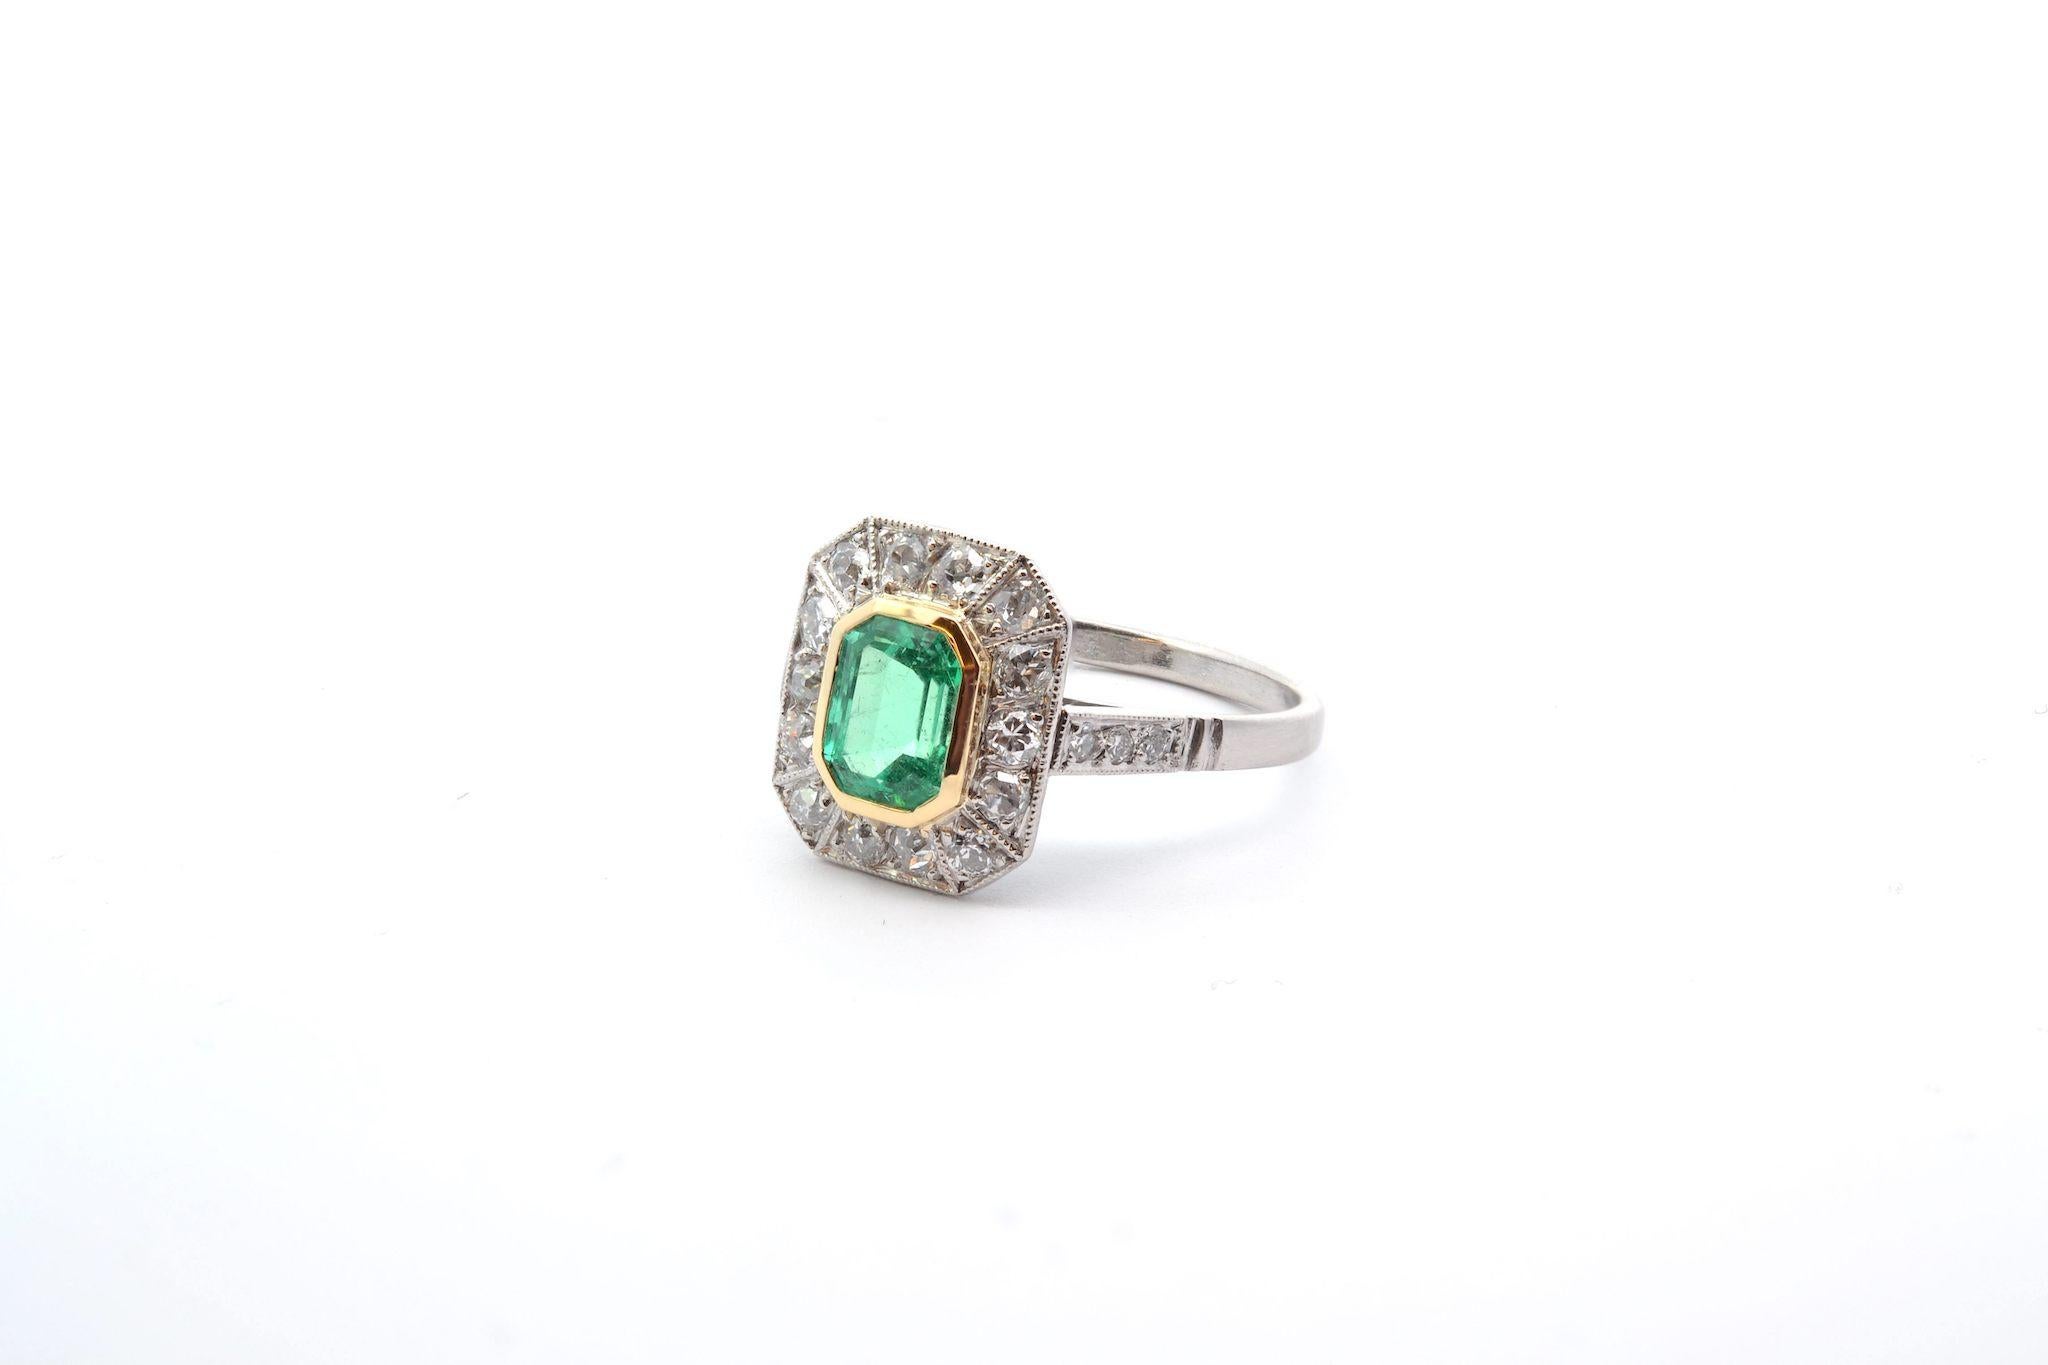 Emerald Cut  1.03 carats emerald ring with diamonds  For Sale